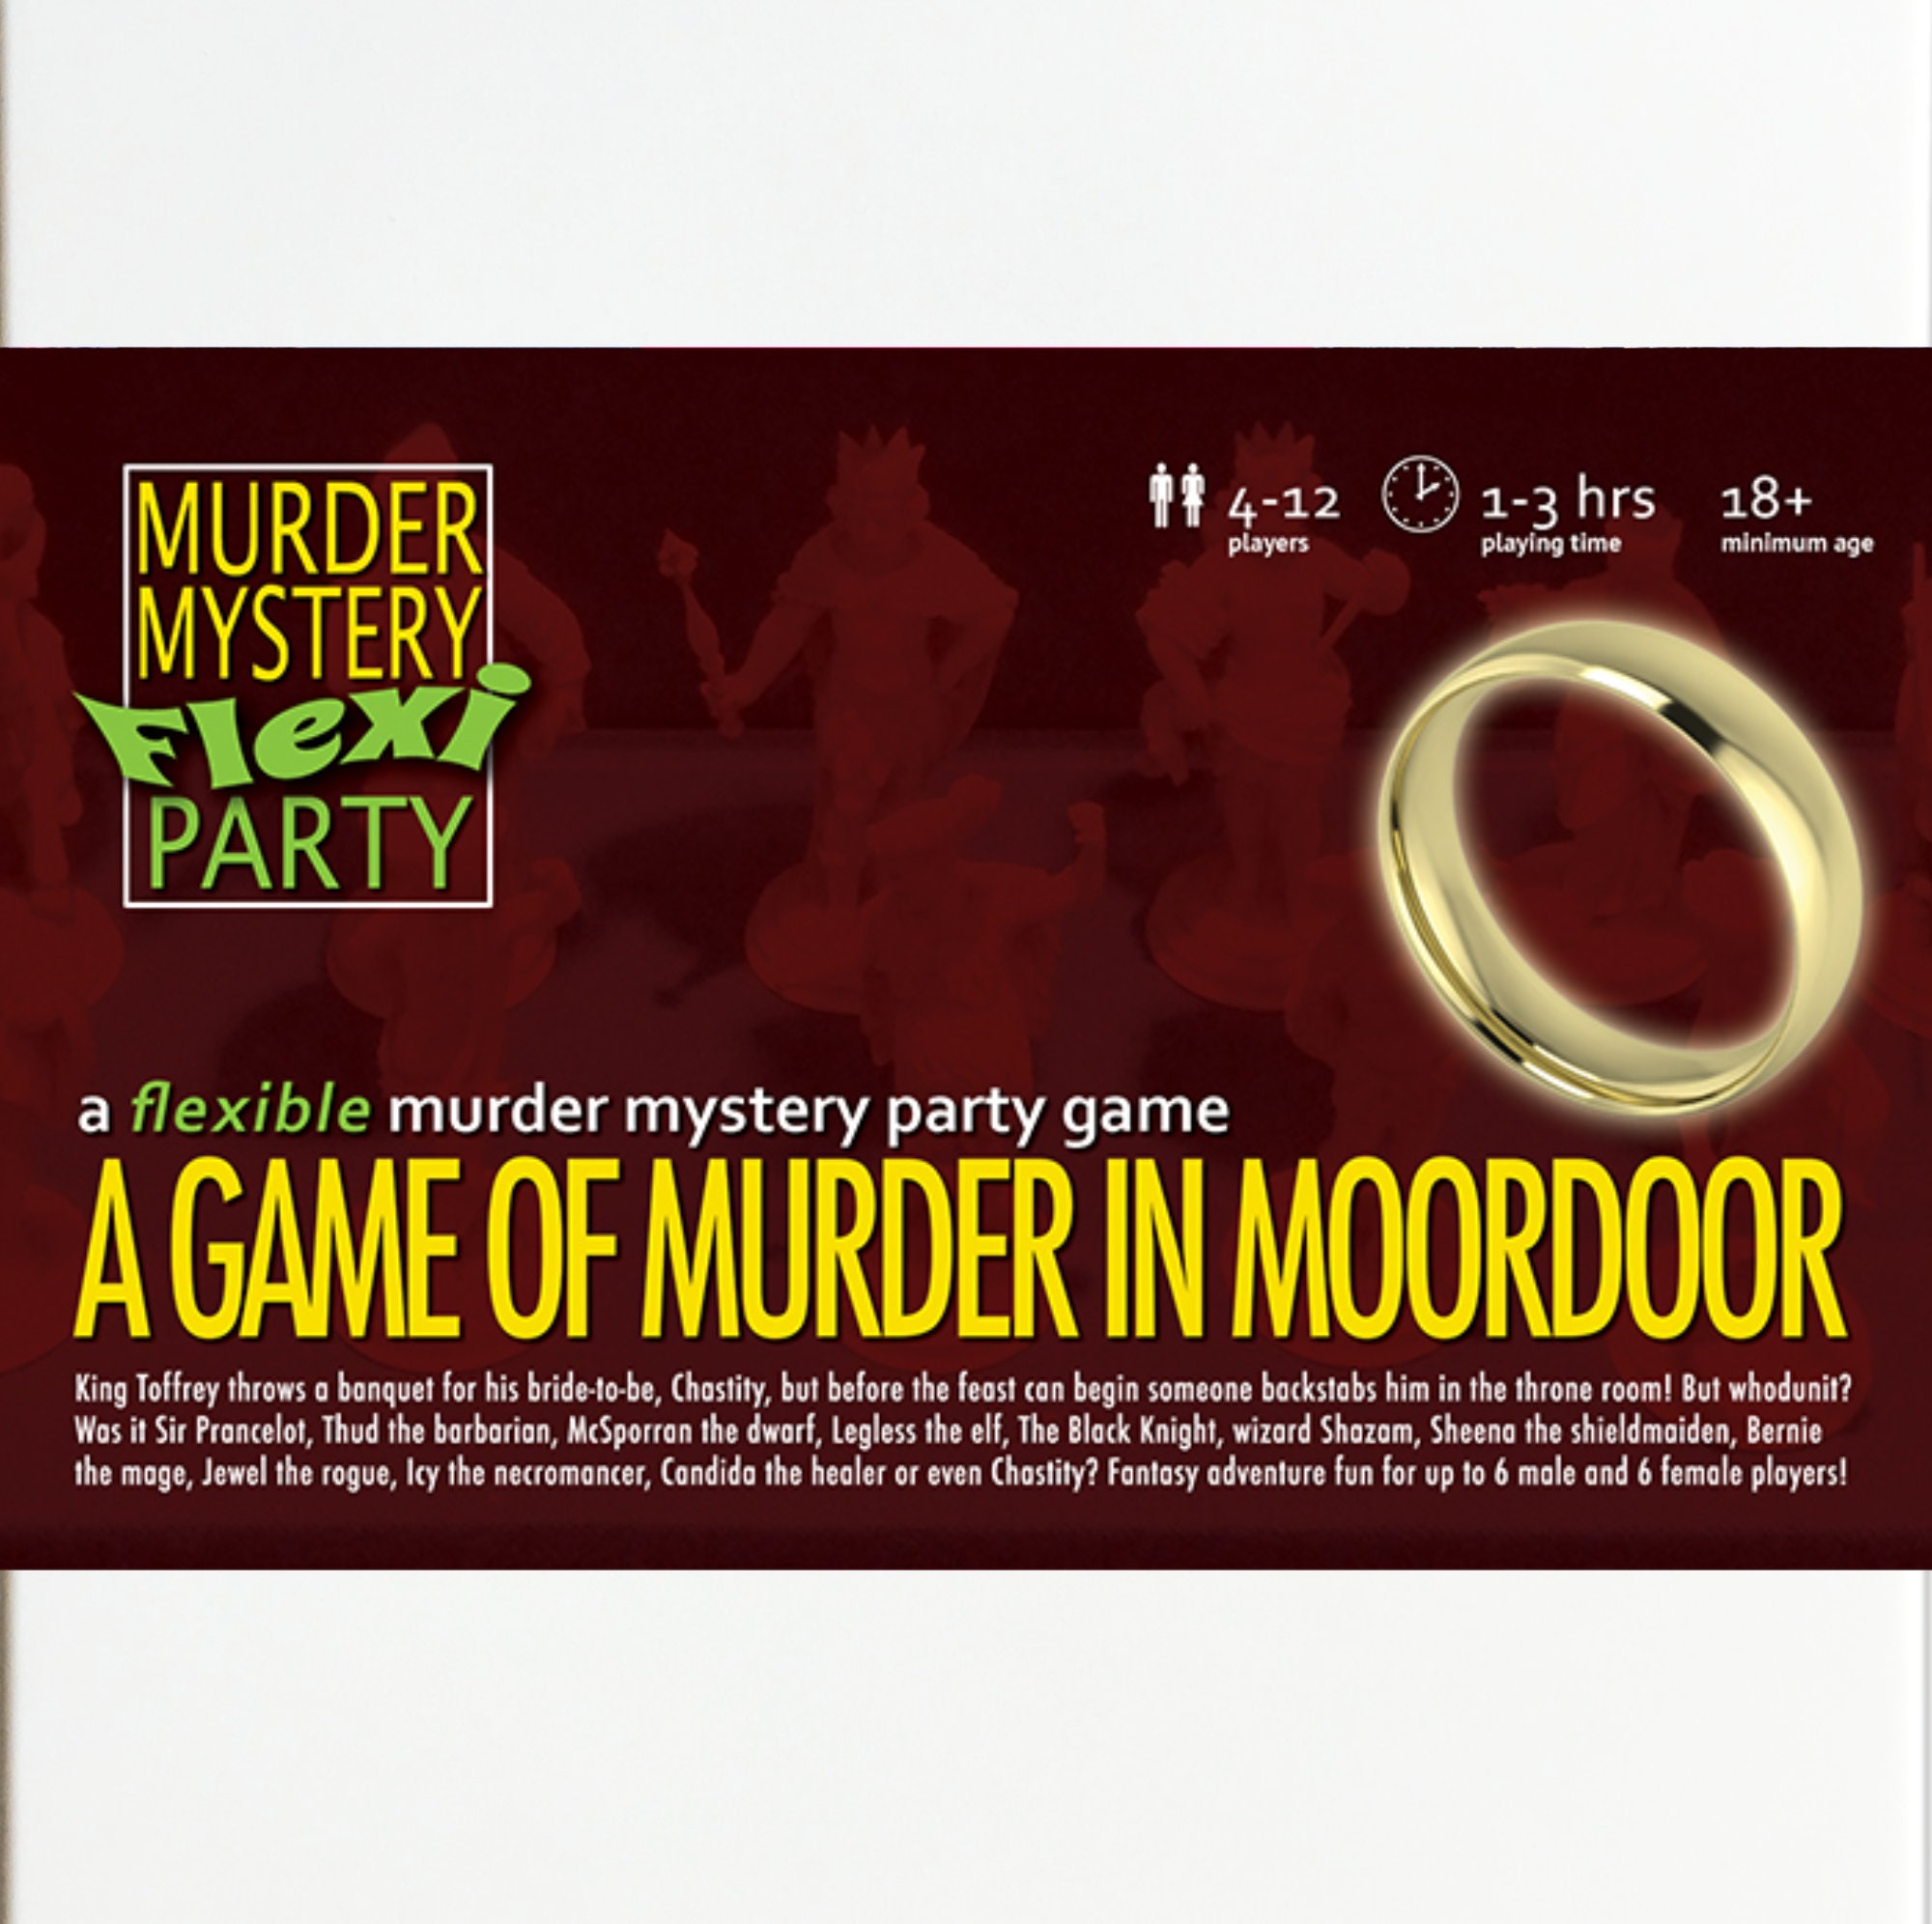 Epic Fantasy 4-12 Player Flexible Murder Mystery Dinner Party image